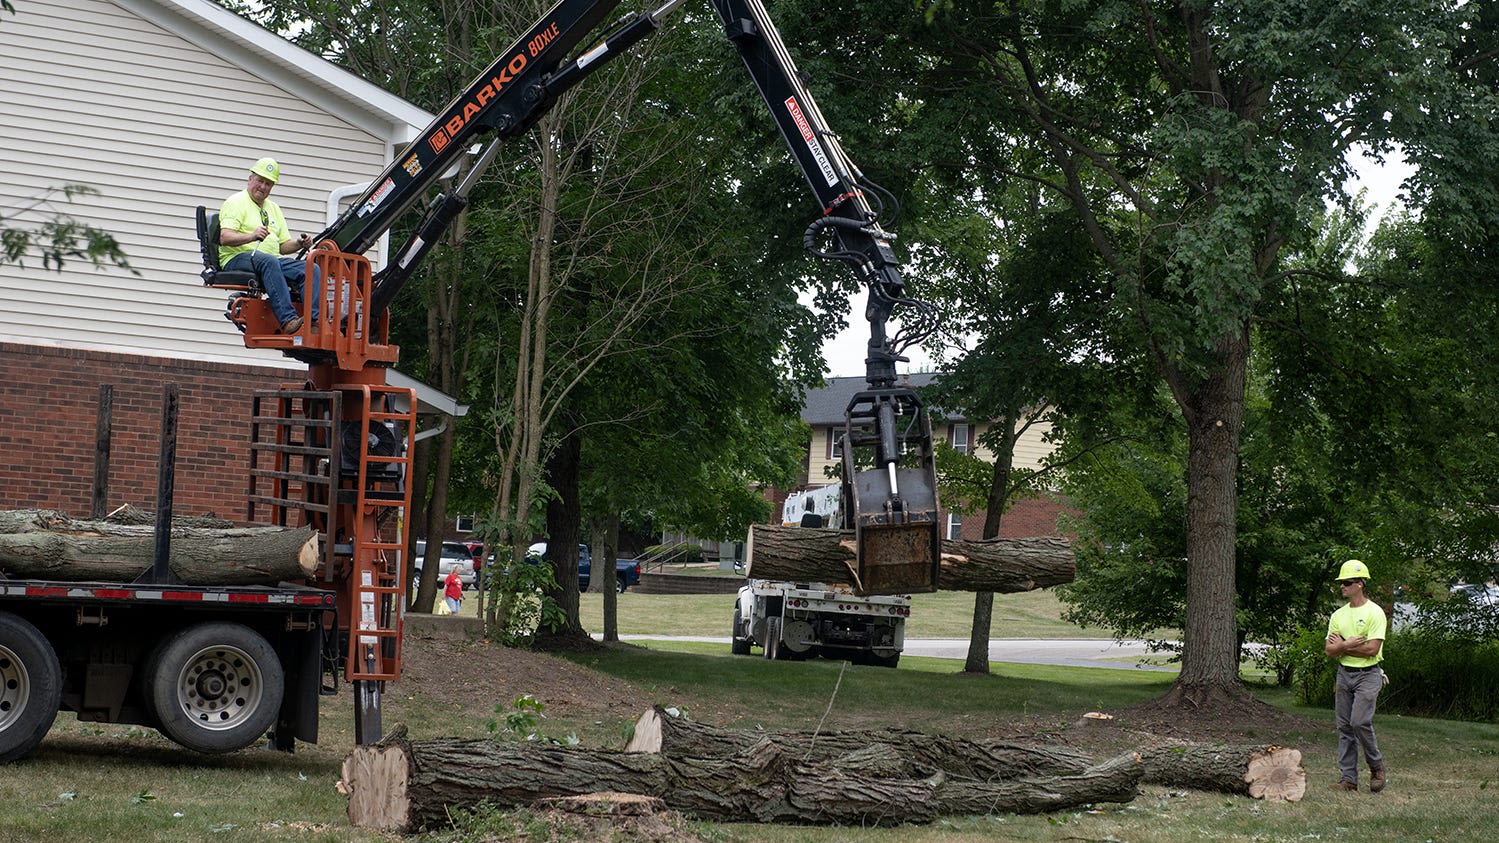 Tree removal at AMHA complex in Cuyahoga Falls puzzles residents; agency explains reasons